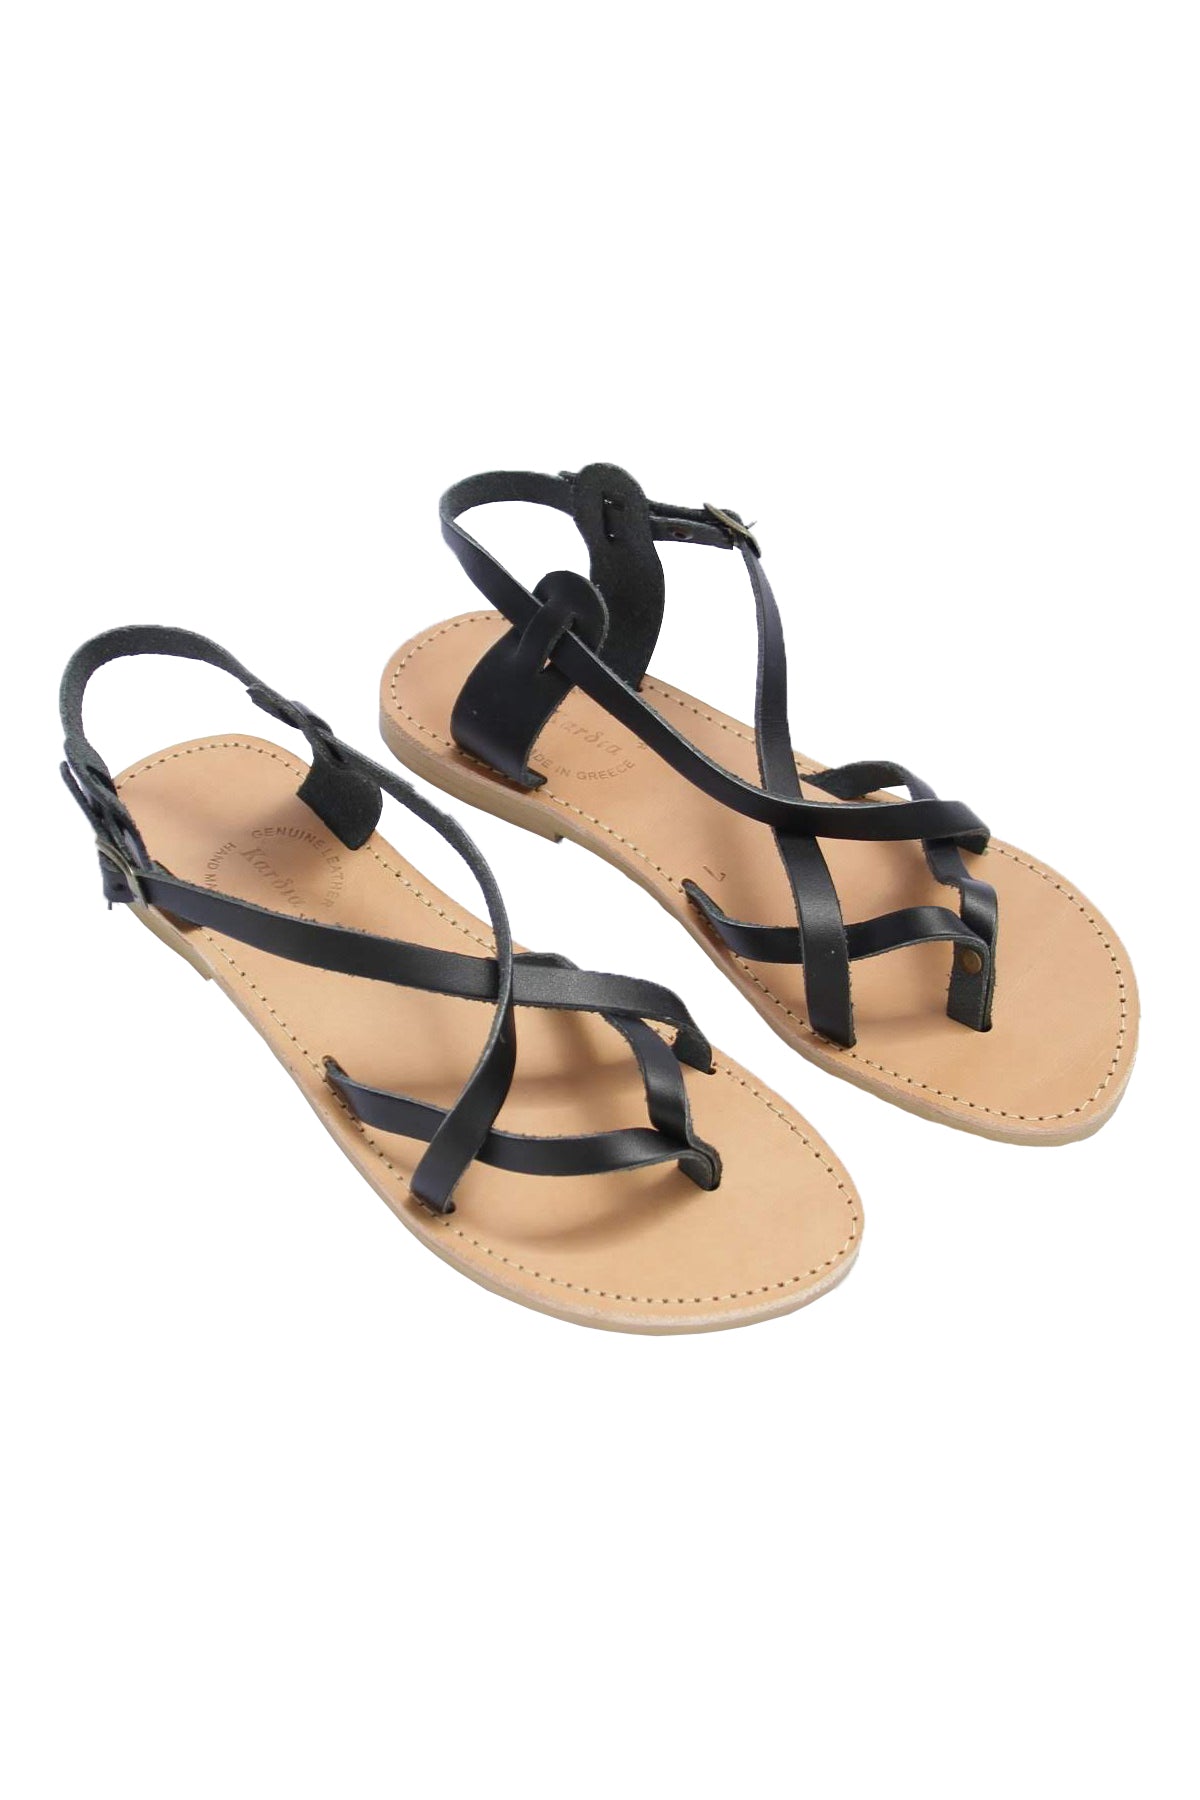 Athena Womens Sandals in Black Leather - Kardia